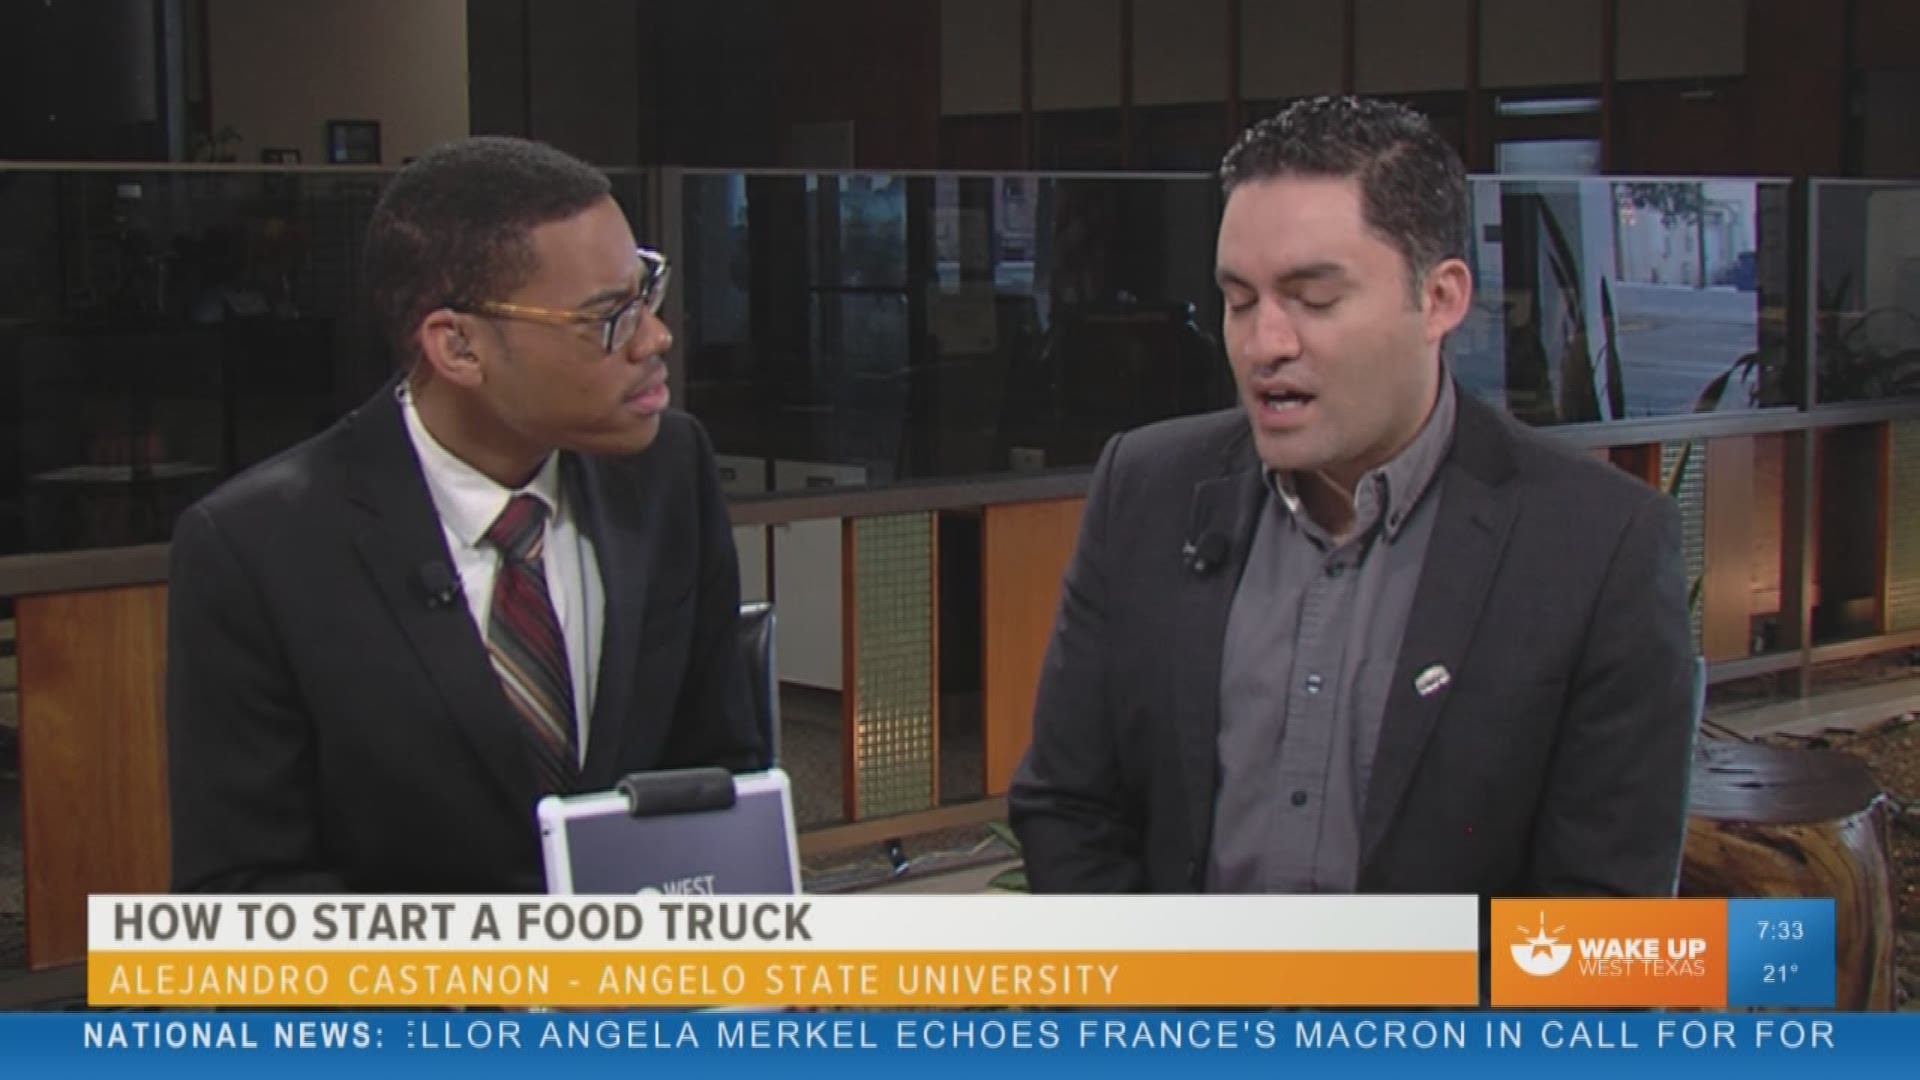 Our Malik Mingo speaks with the Angelo State University Small Business Development Center about some tips on how to start a food truck business.